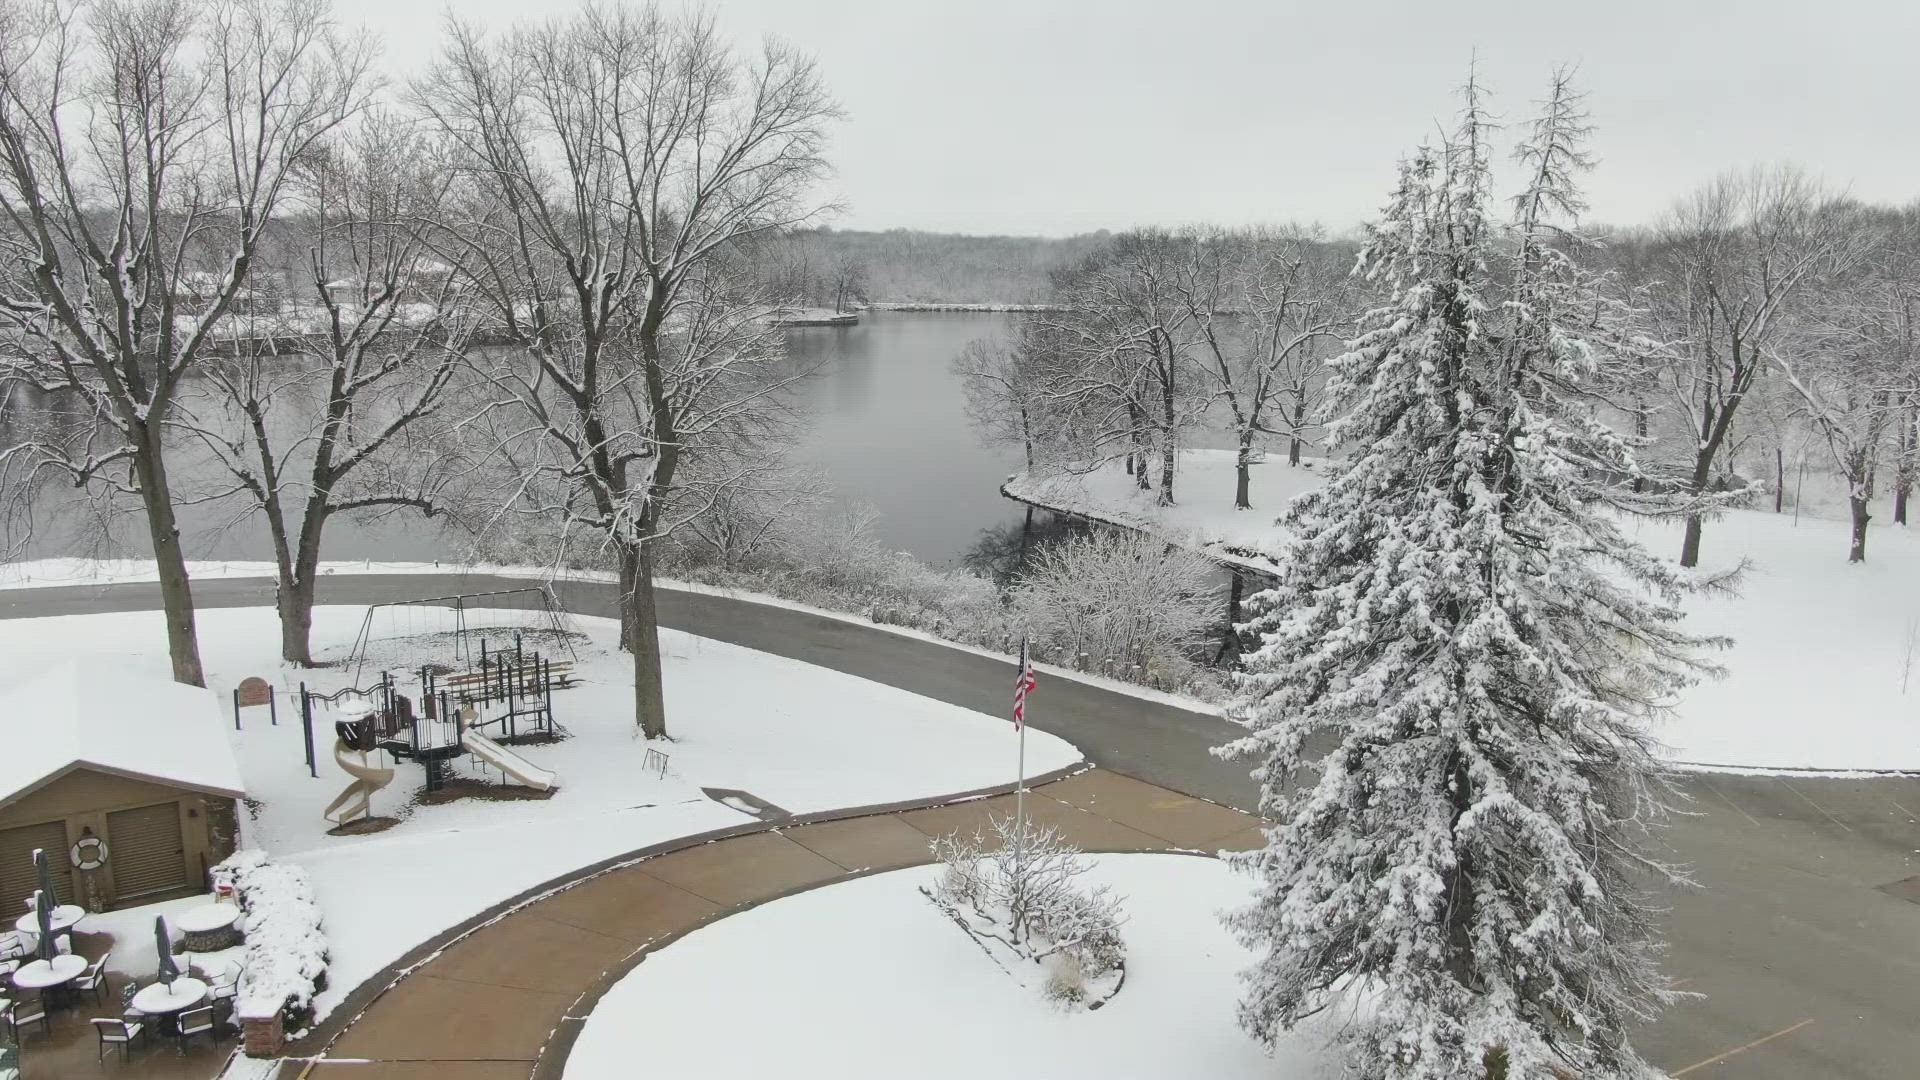 No thoughts — just two blissful minutes of snowfall at the Soangetaha Country Club in Galesburg.